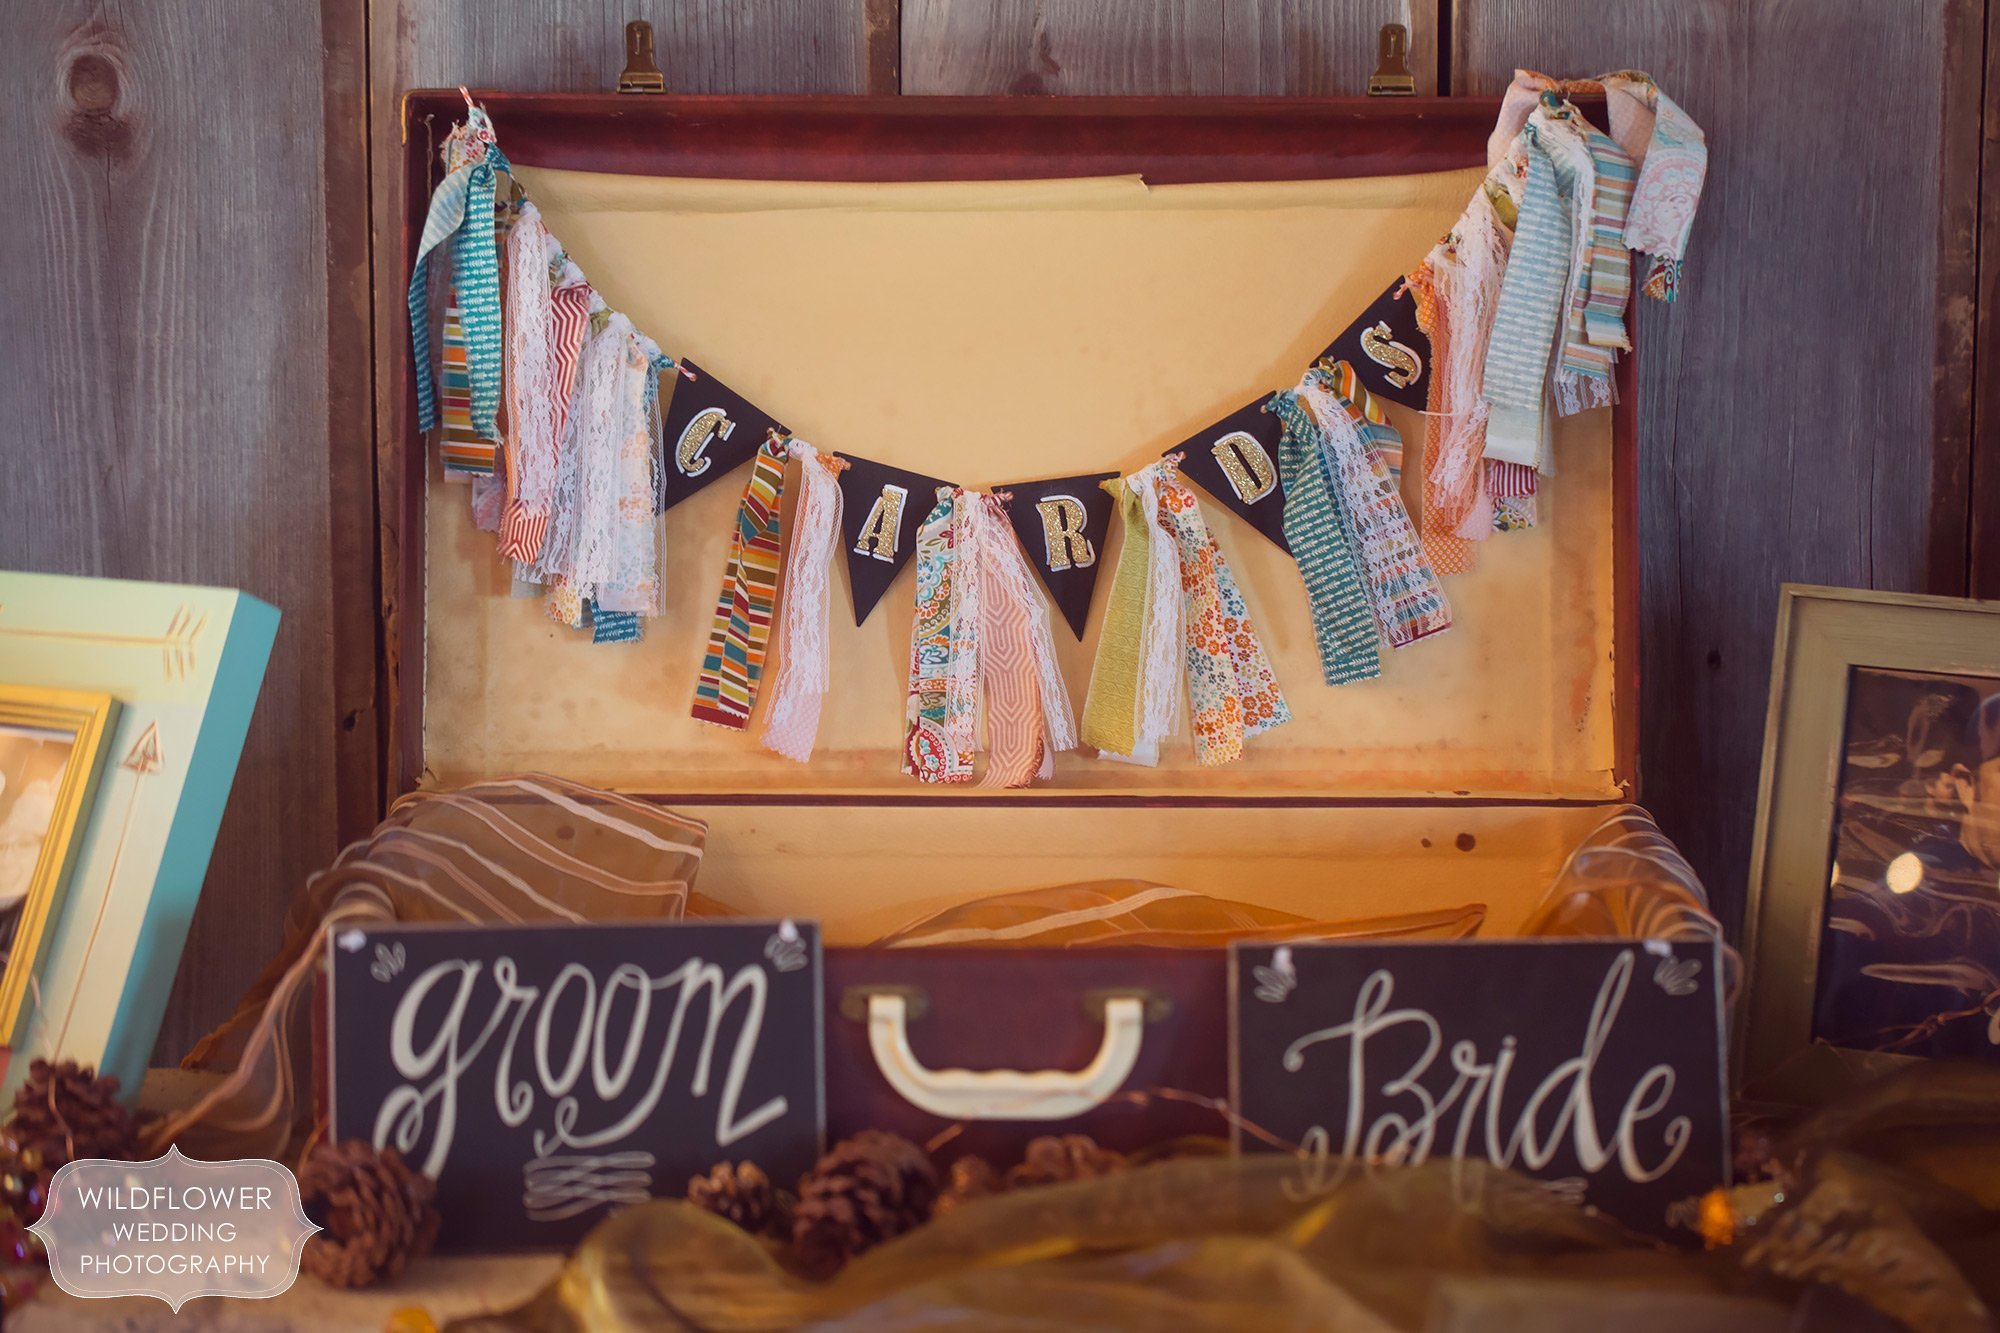 A vintage suitcase is repurposed as wedding decor for cards and gifts at this barn wedding in KC.